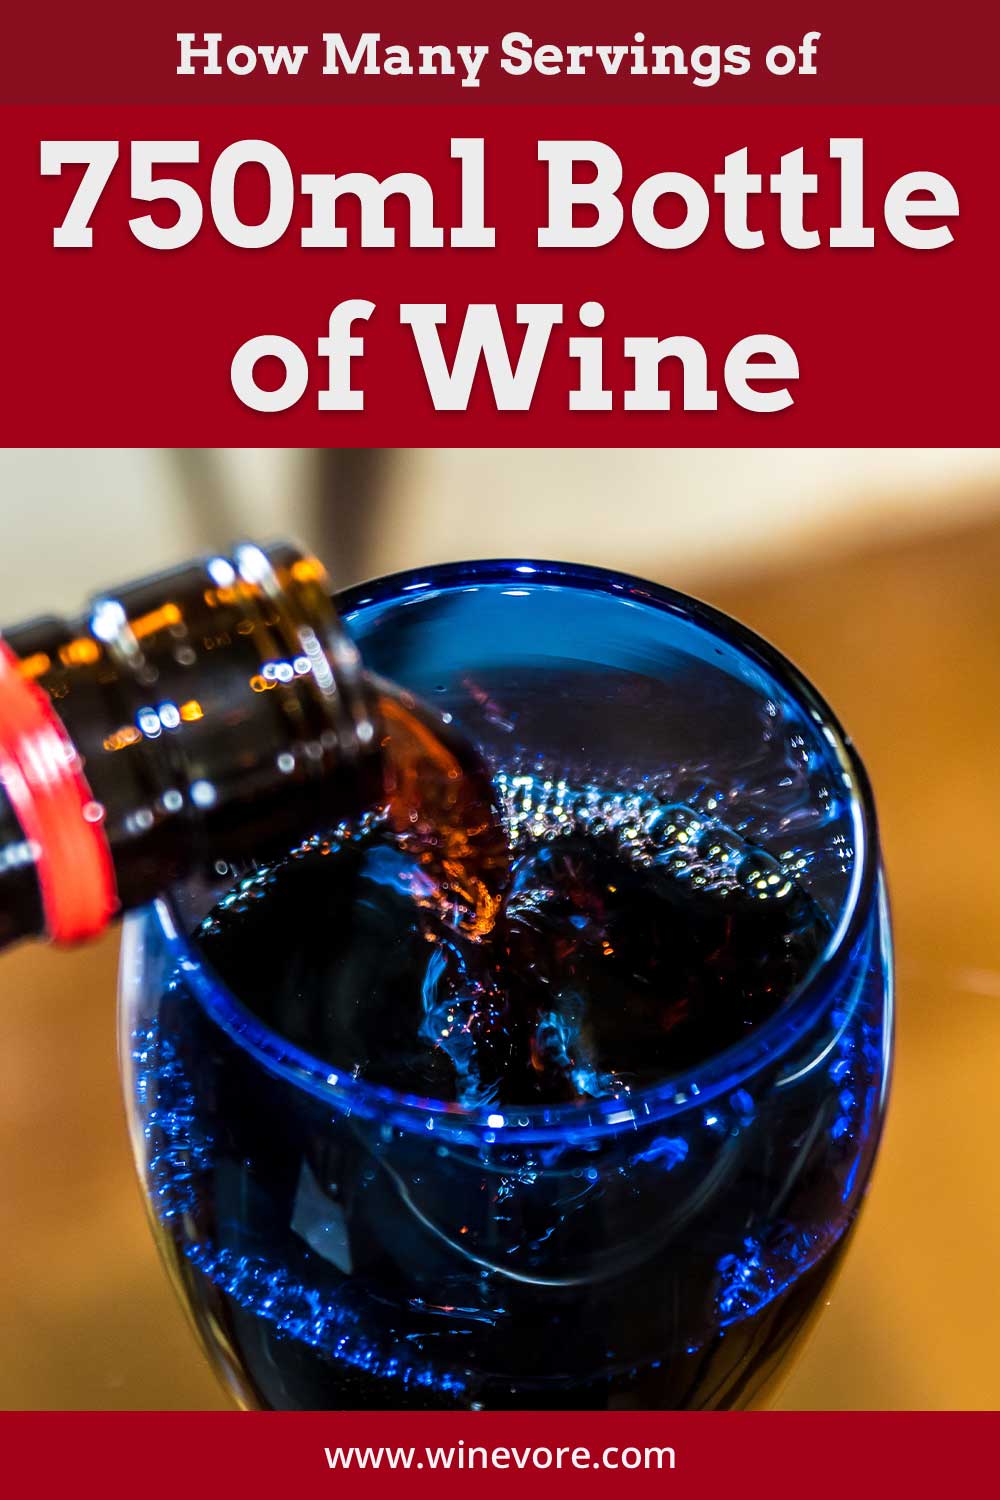 Wine being poured into a glass - How Many Servings of 750ml Bottle of Wine?